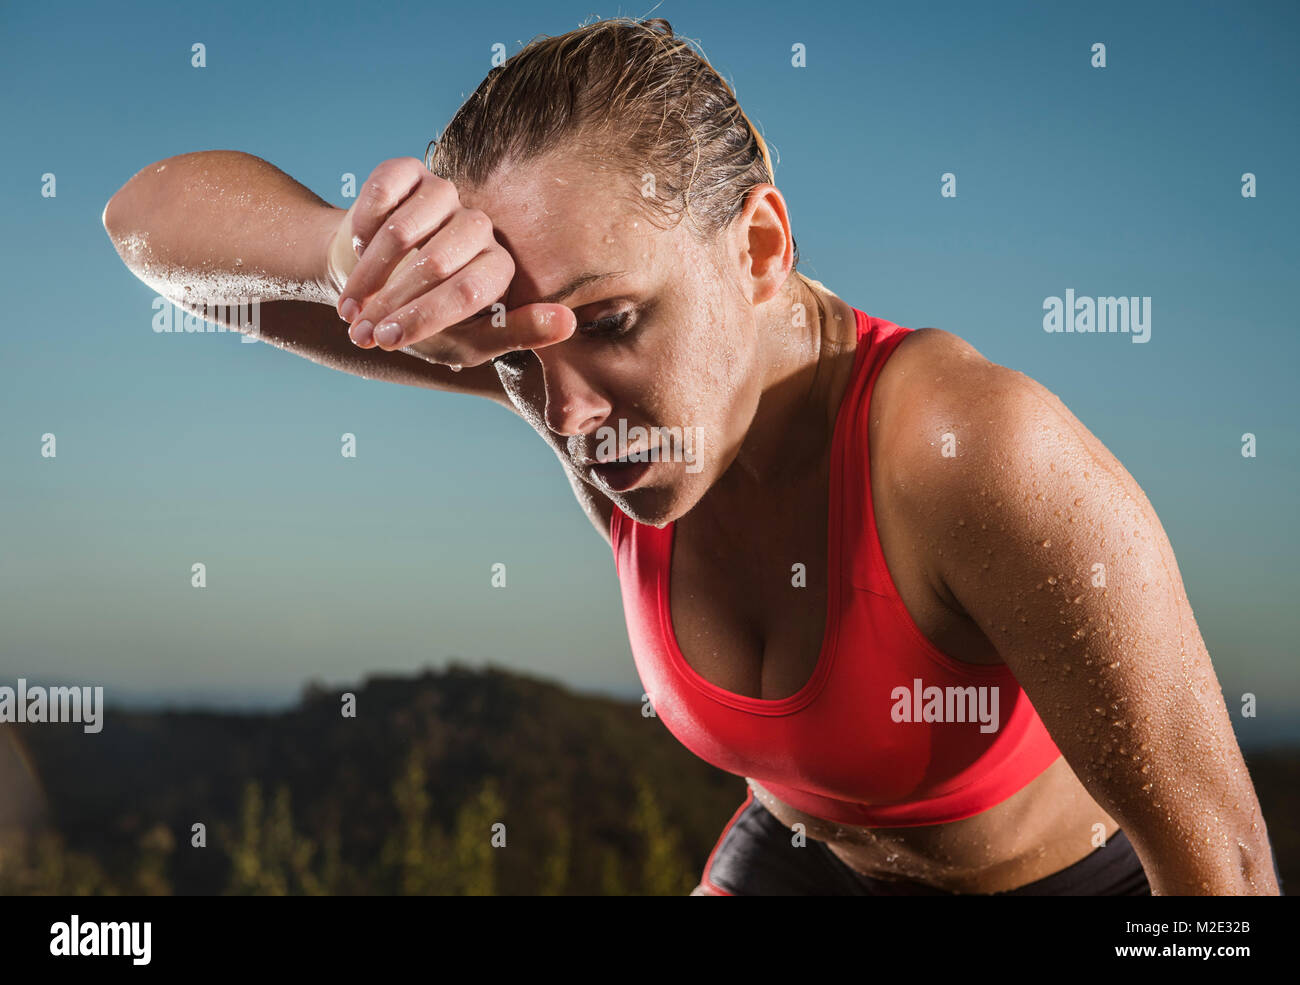 Caucasian woman wiping sweat from forehead Stock Photo